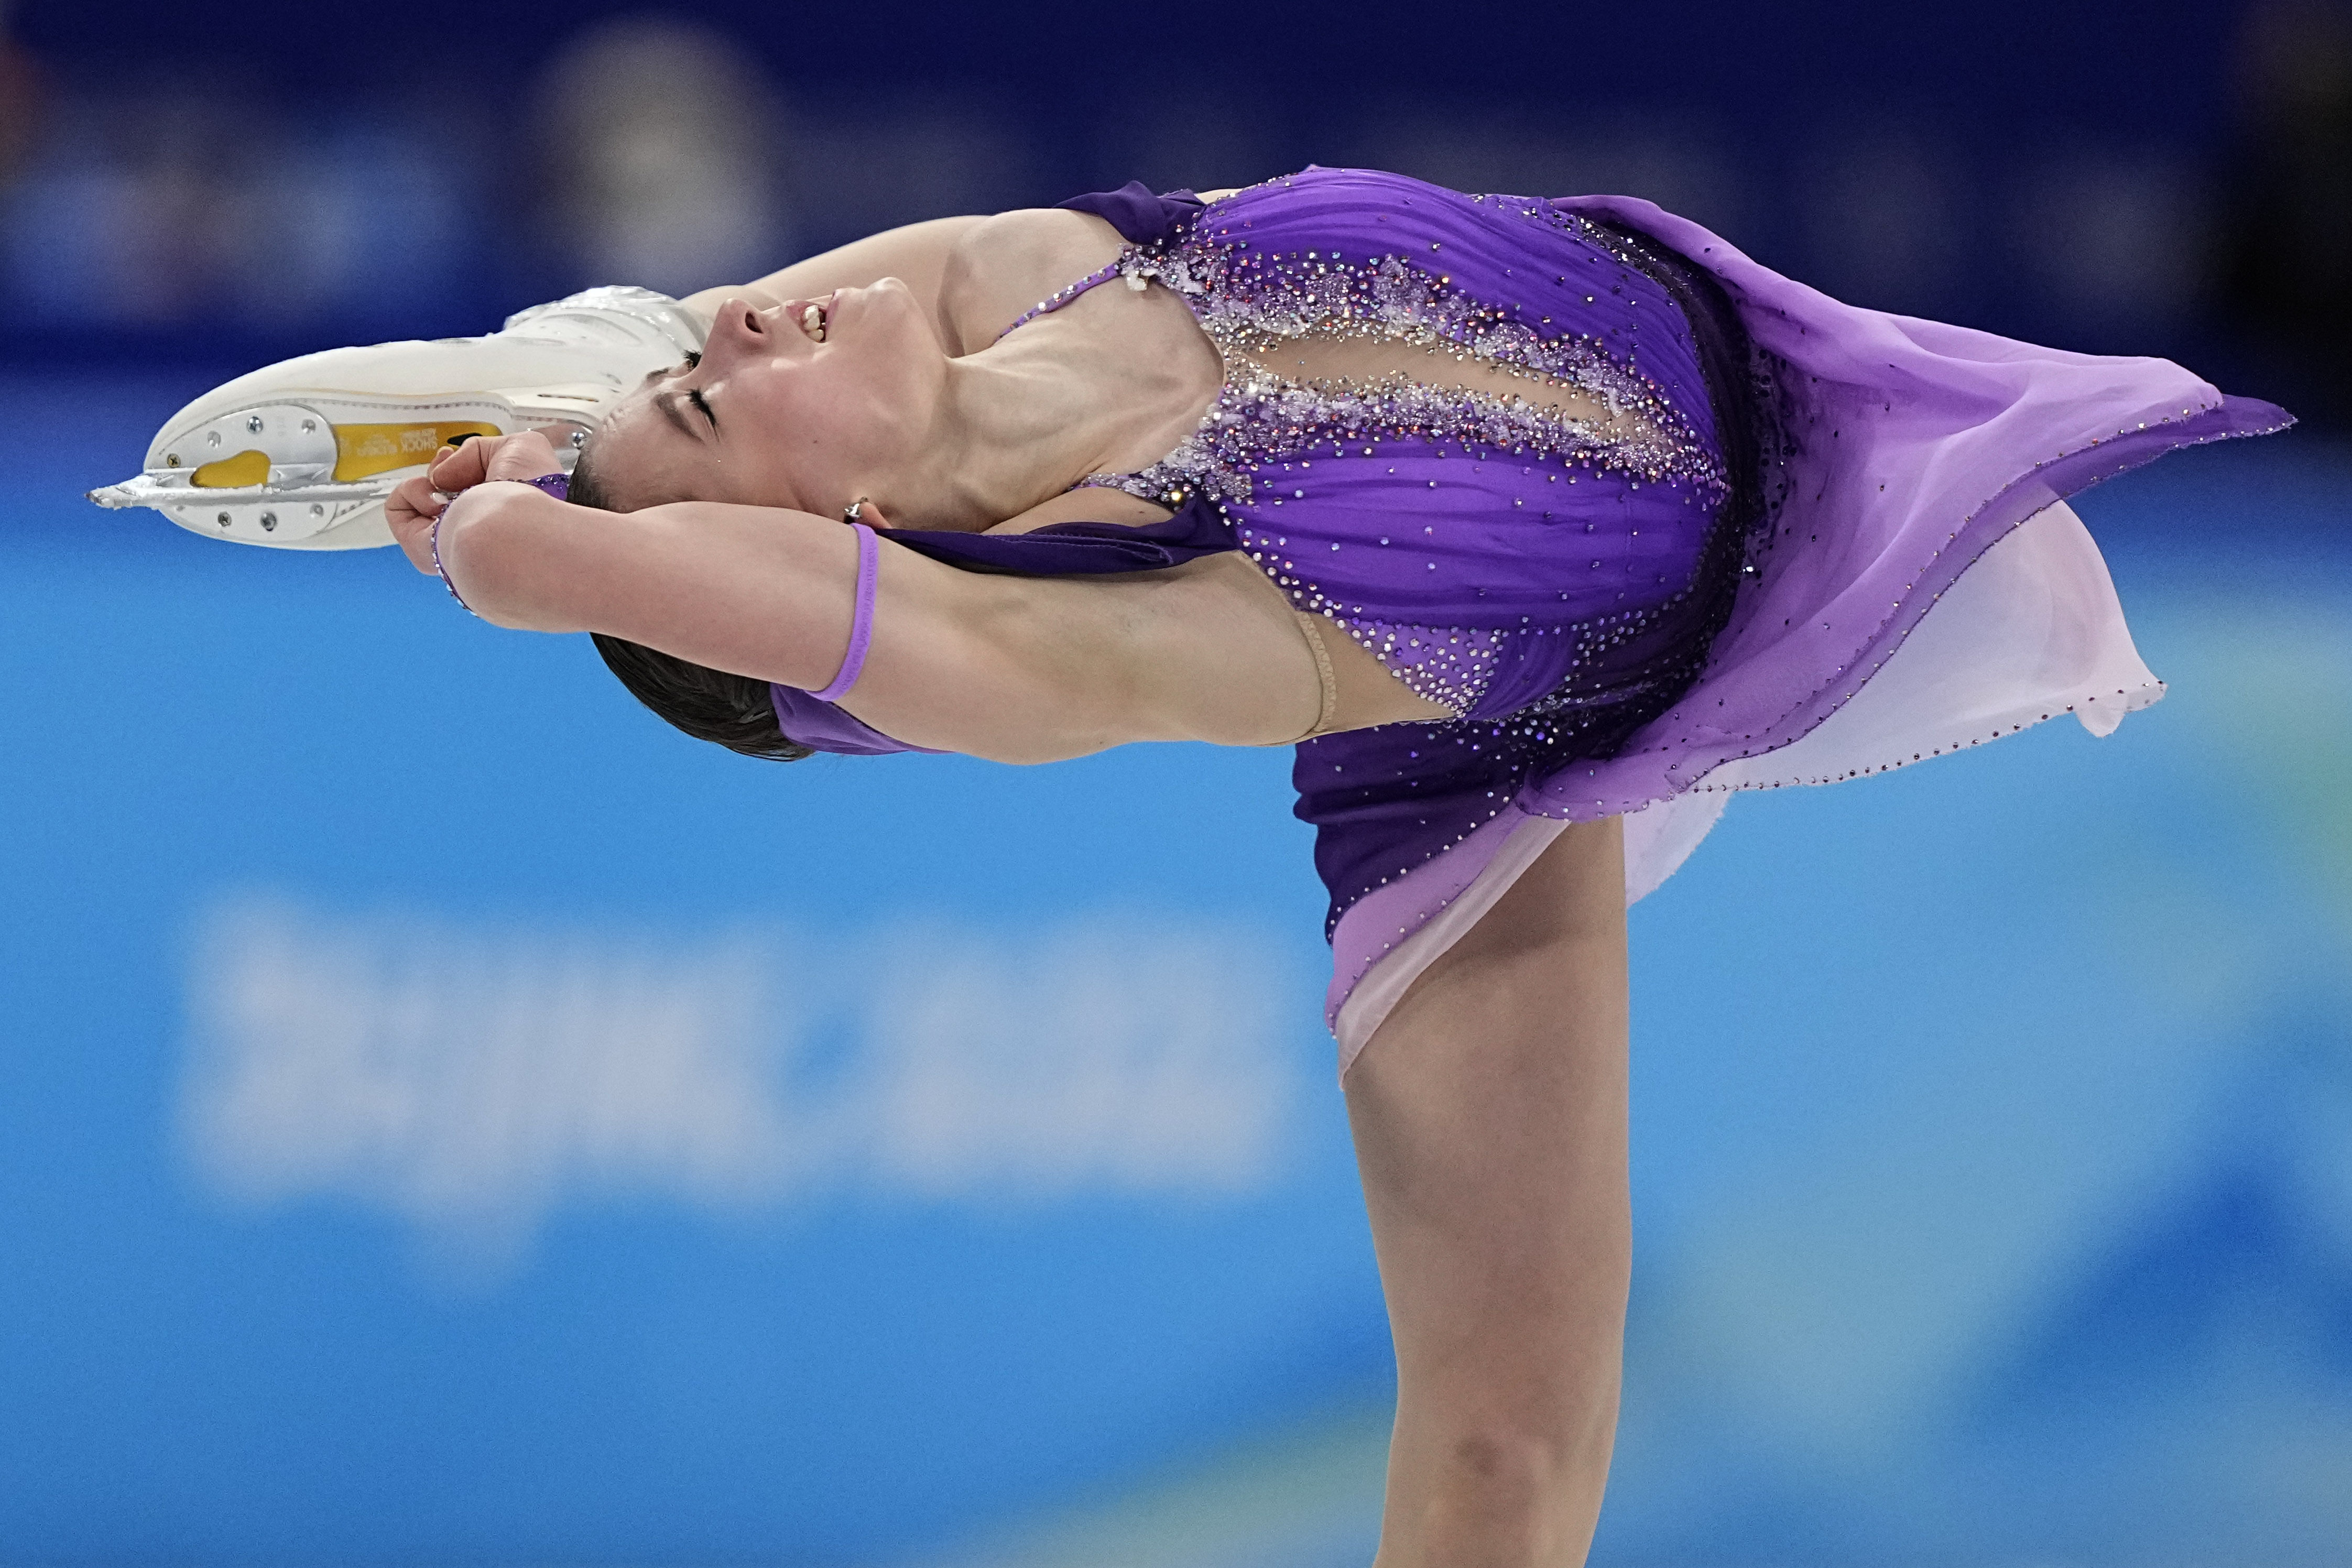 Doping is not tolerated in the Olympics, former skater Adam Rippon says, angry Kamila Valieva has been allowed to skate